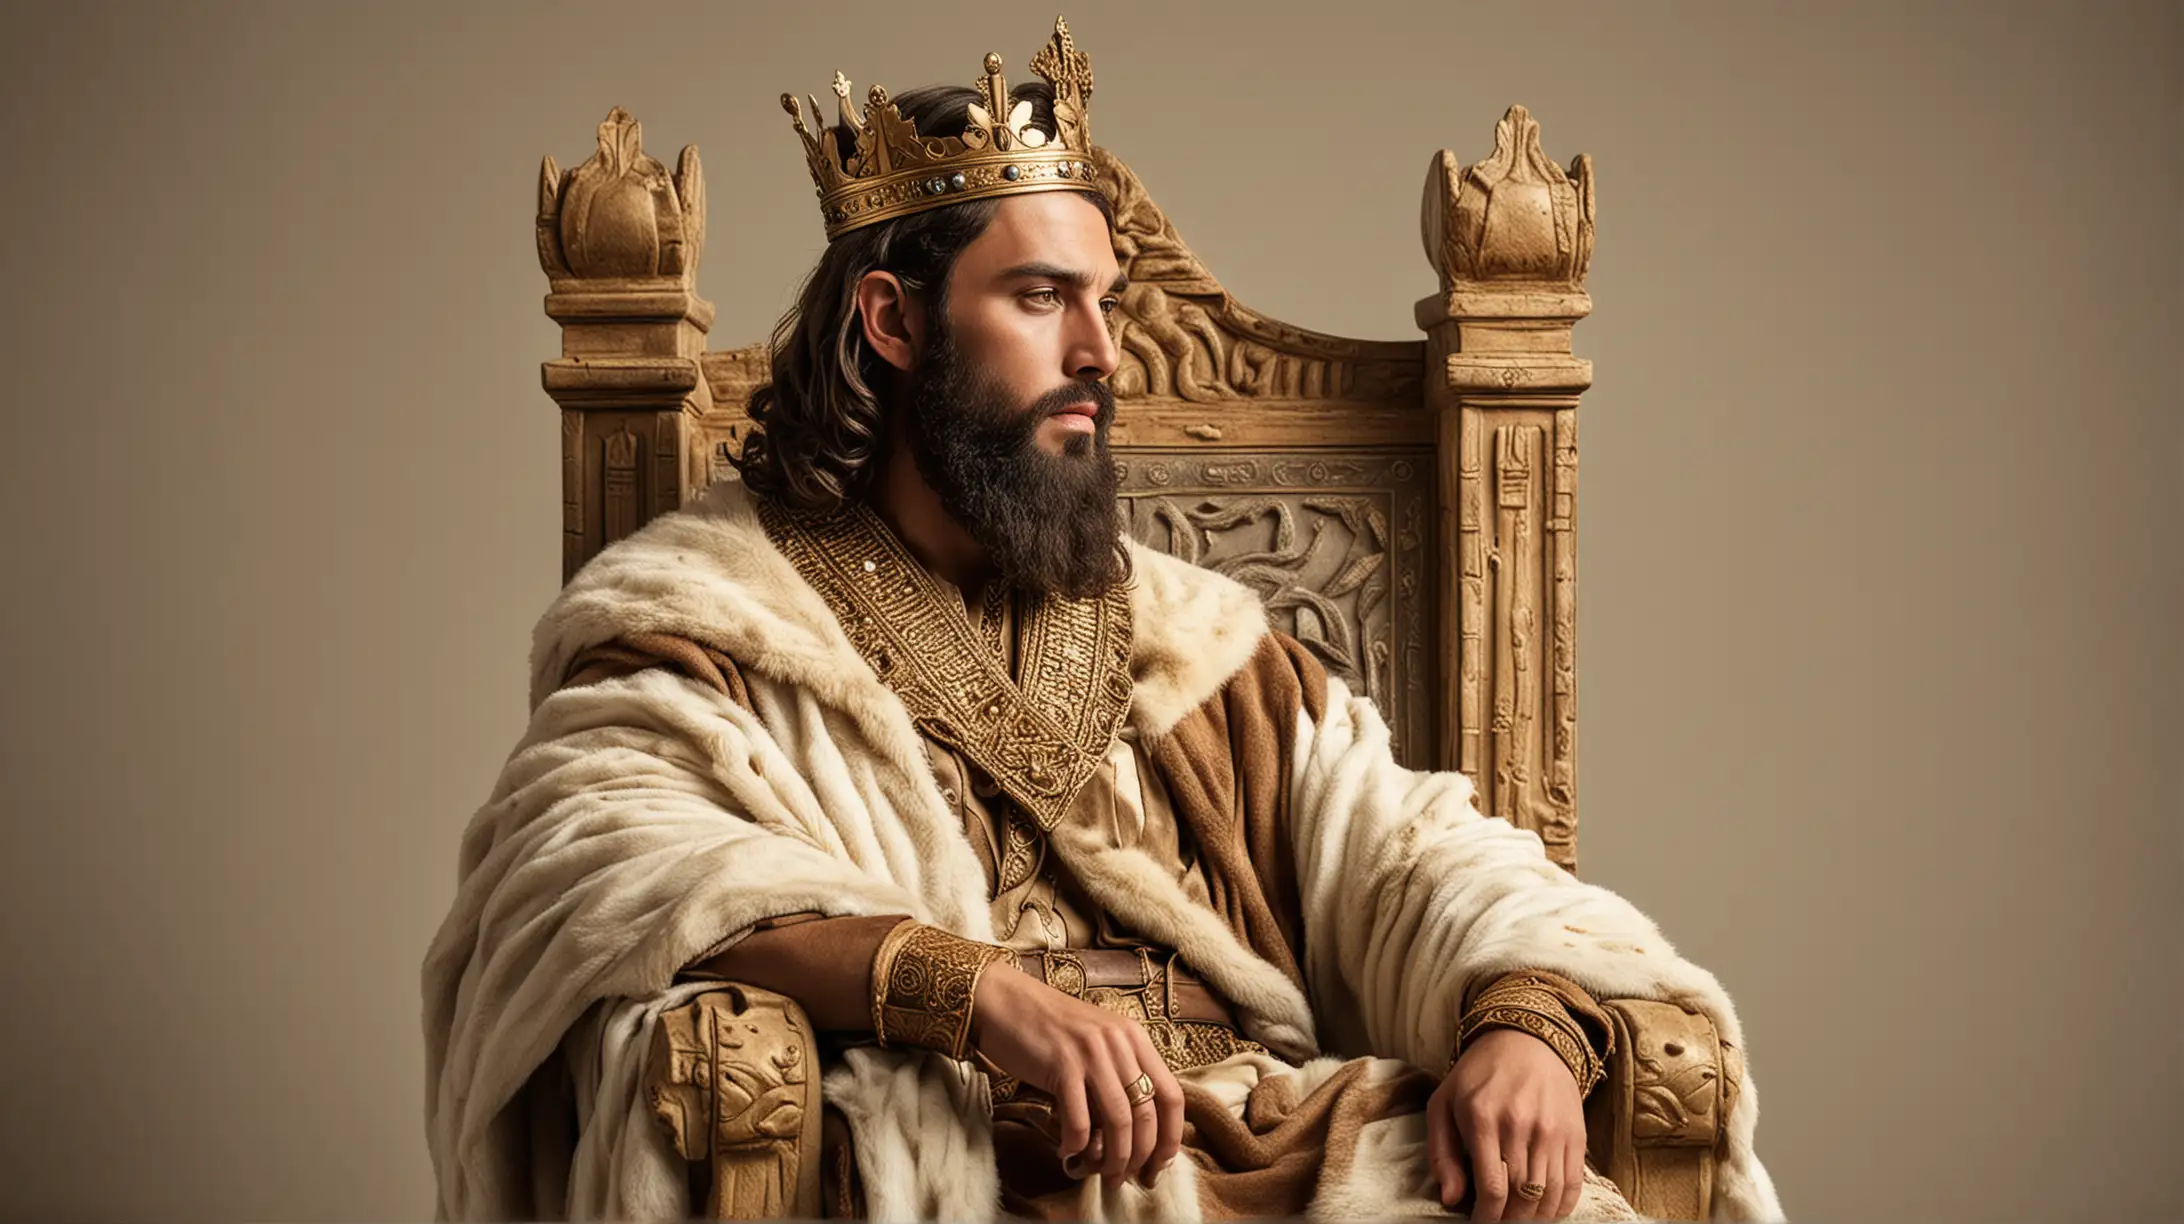 A back and side profile view of a Handsome King sitting on his throne .  Set during the Biblical era of King Solomon.